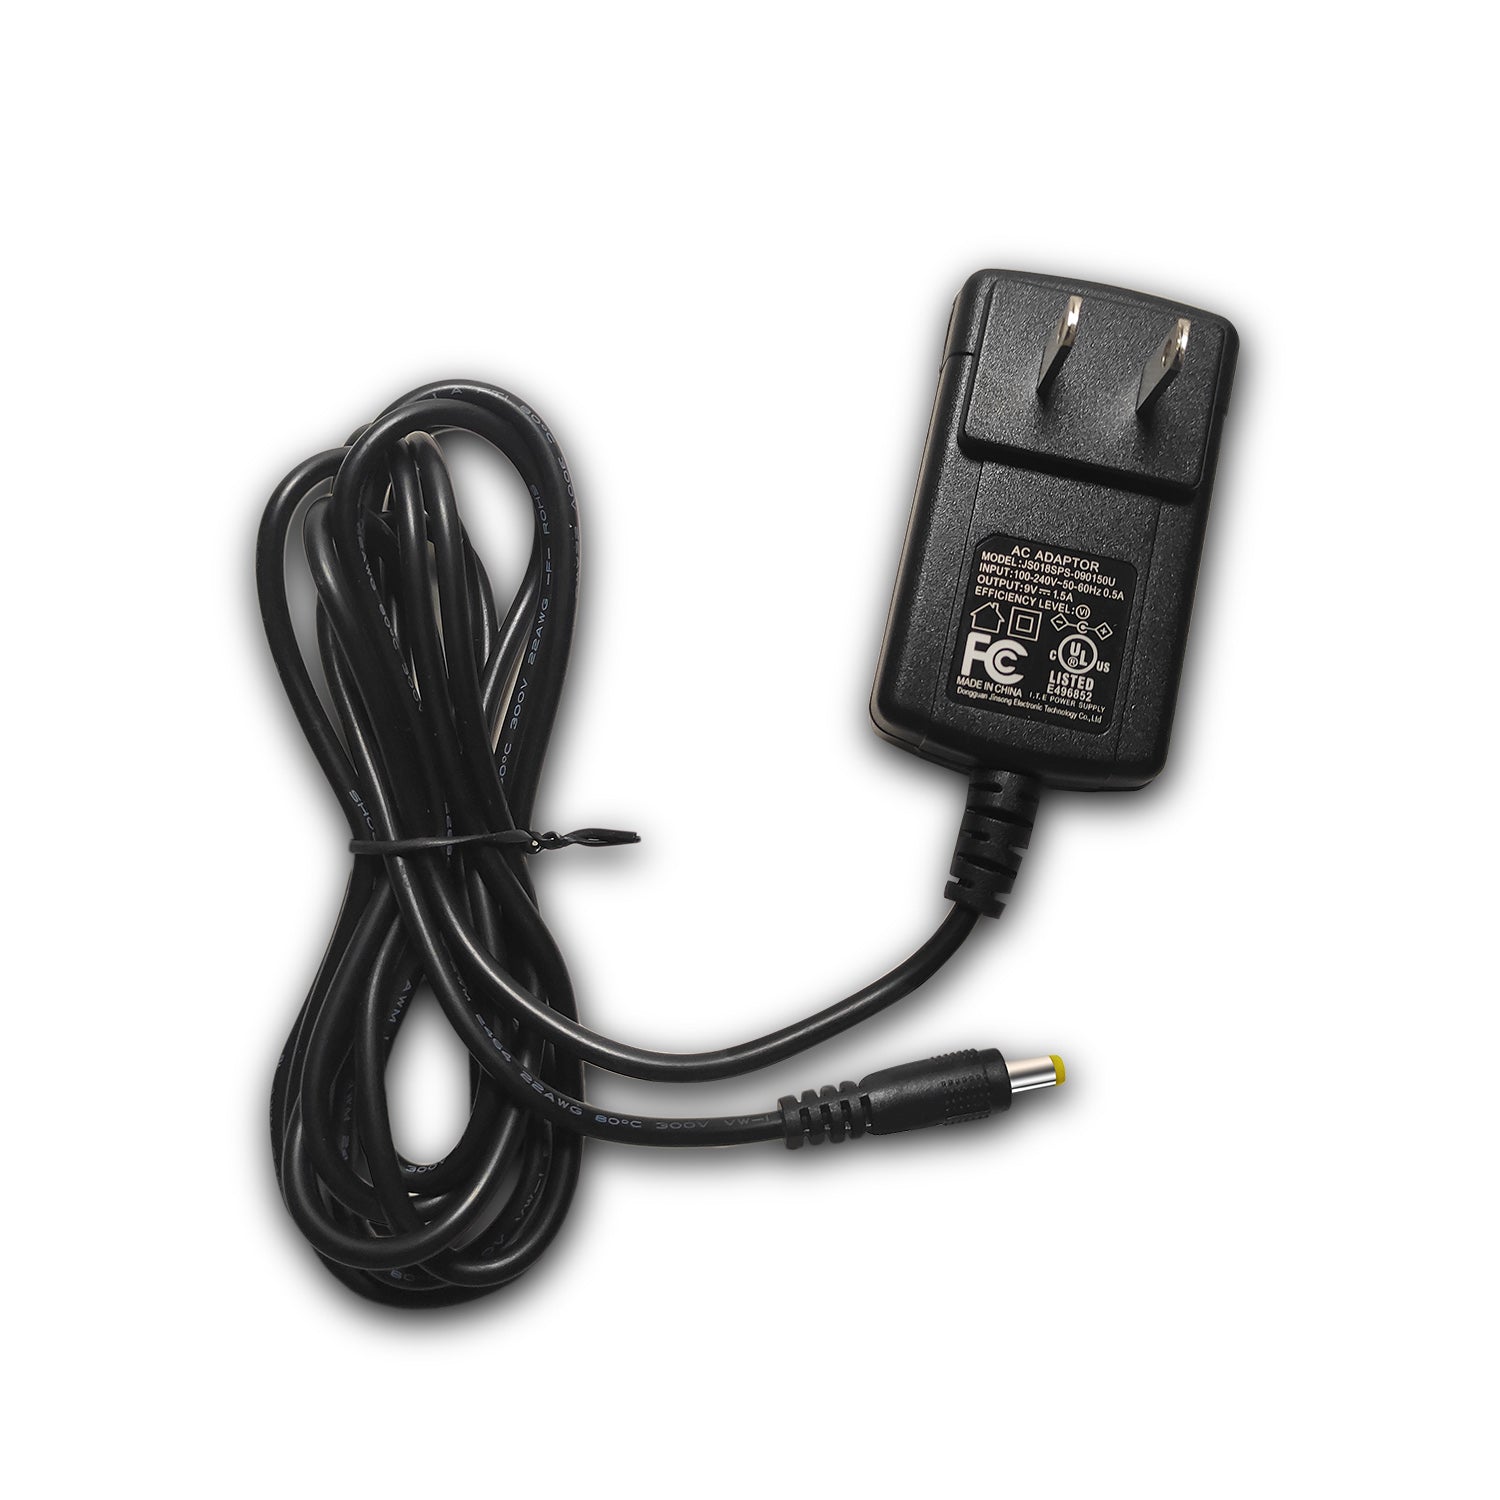 Replacement Power Adapter for TV Speakers SM-621D, SM-621 and SM-961 –  Simolio Electronics